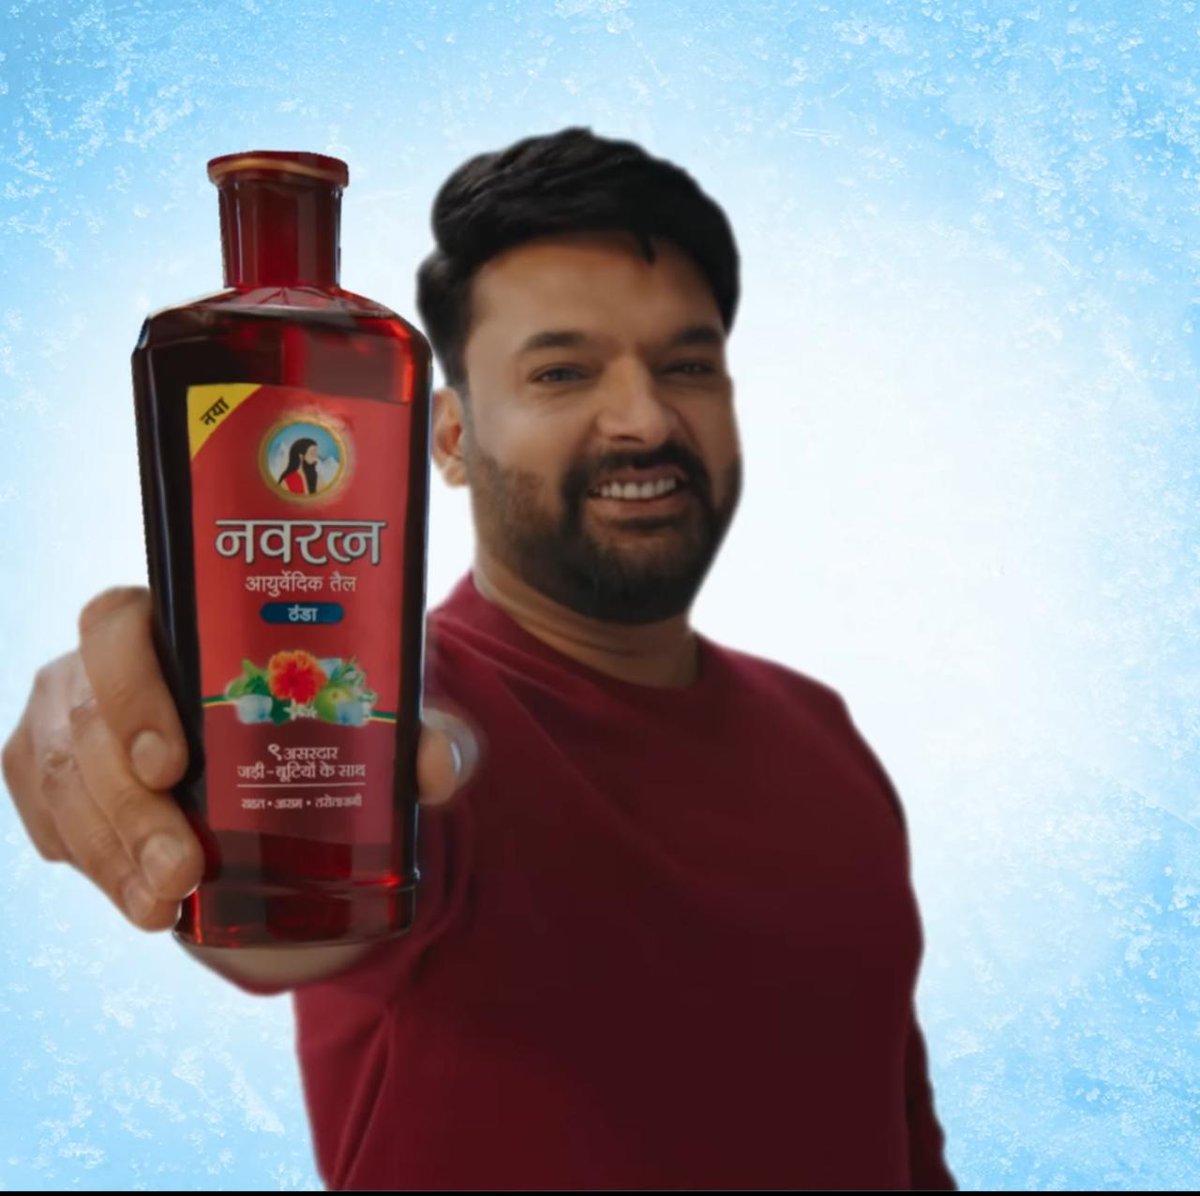 Need a breather? Navratna Oil's quick champi is here to rescue you from the heat. #NavratnaOil